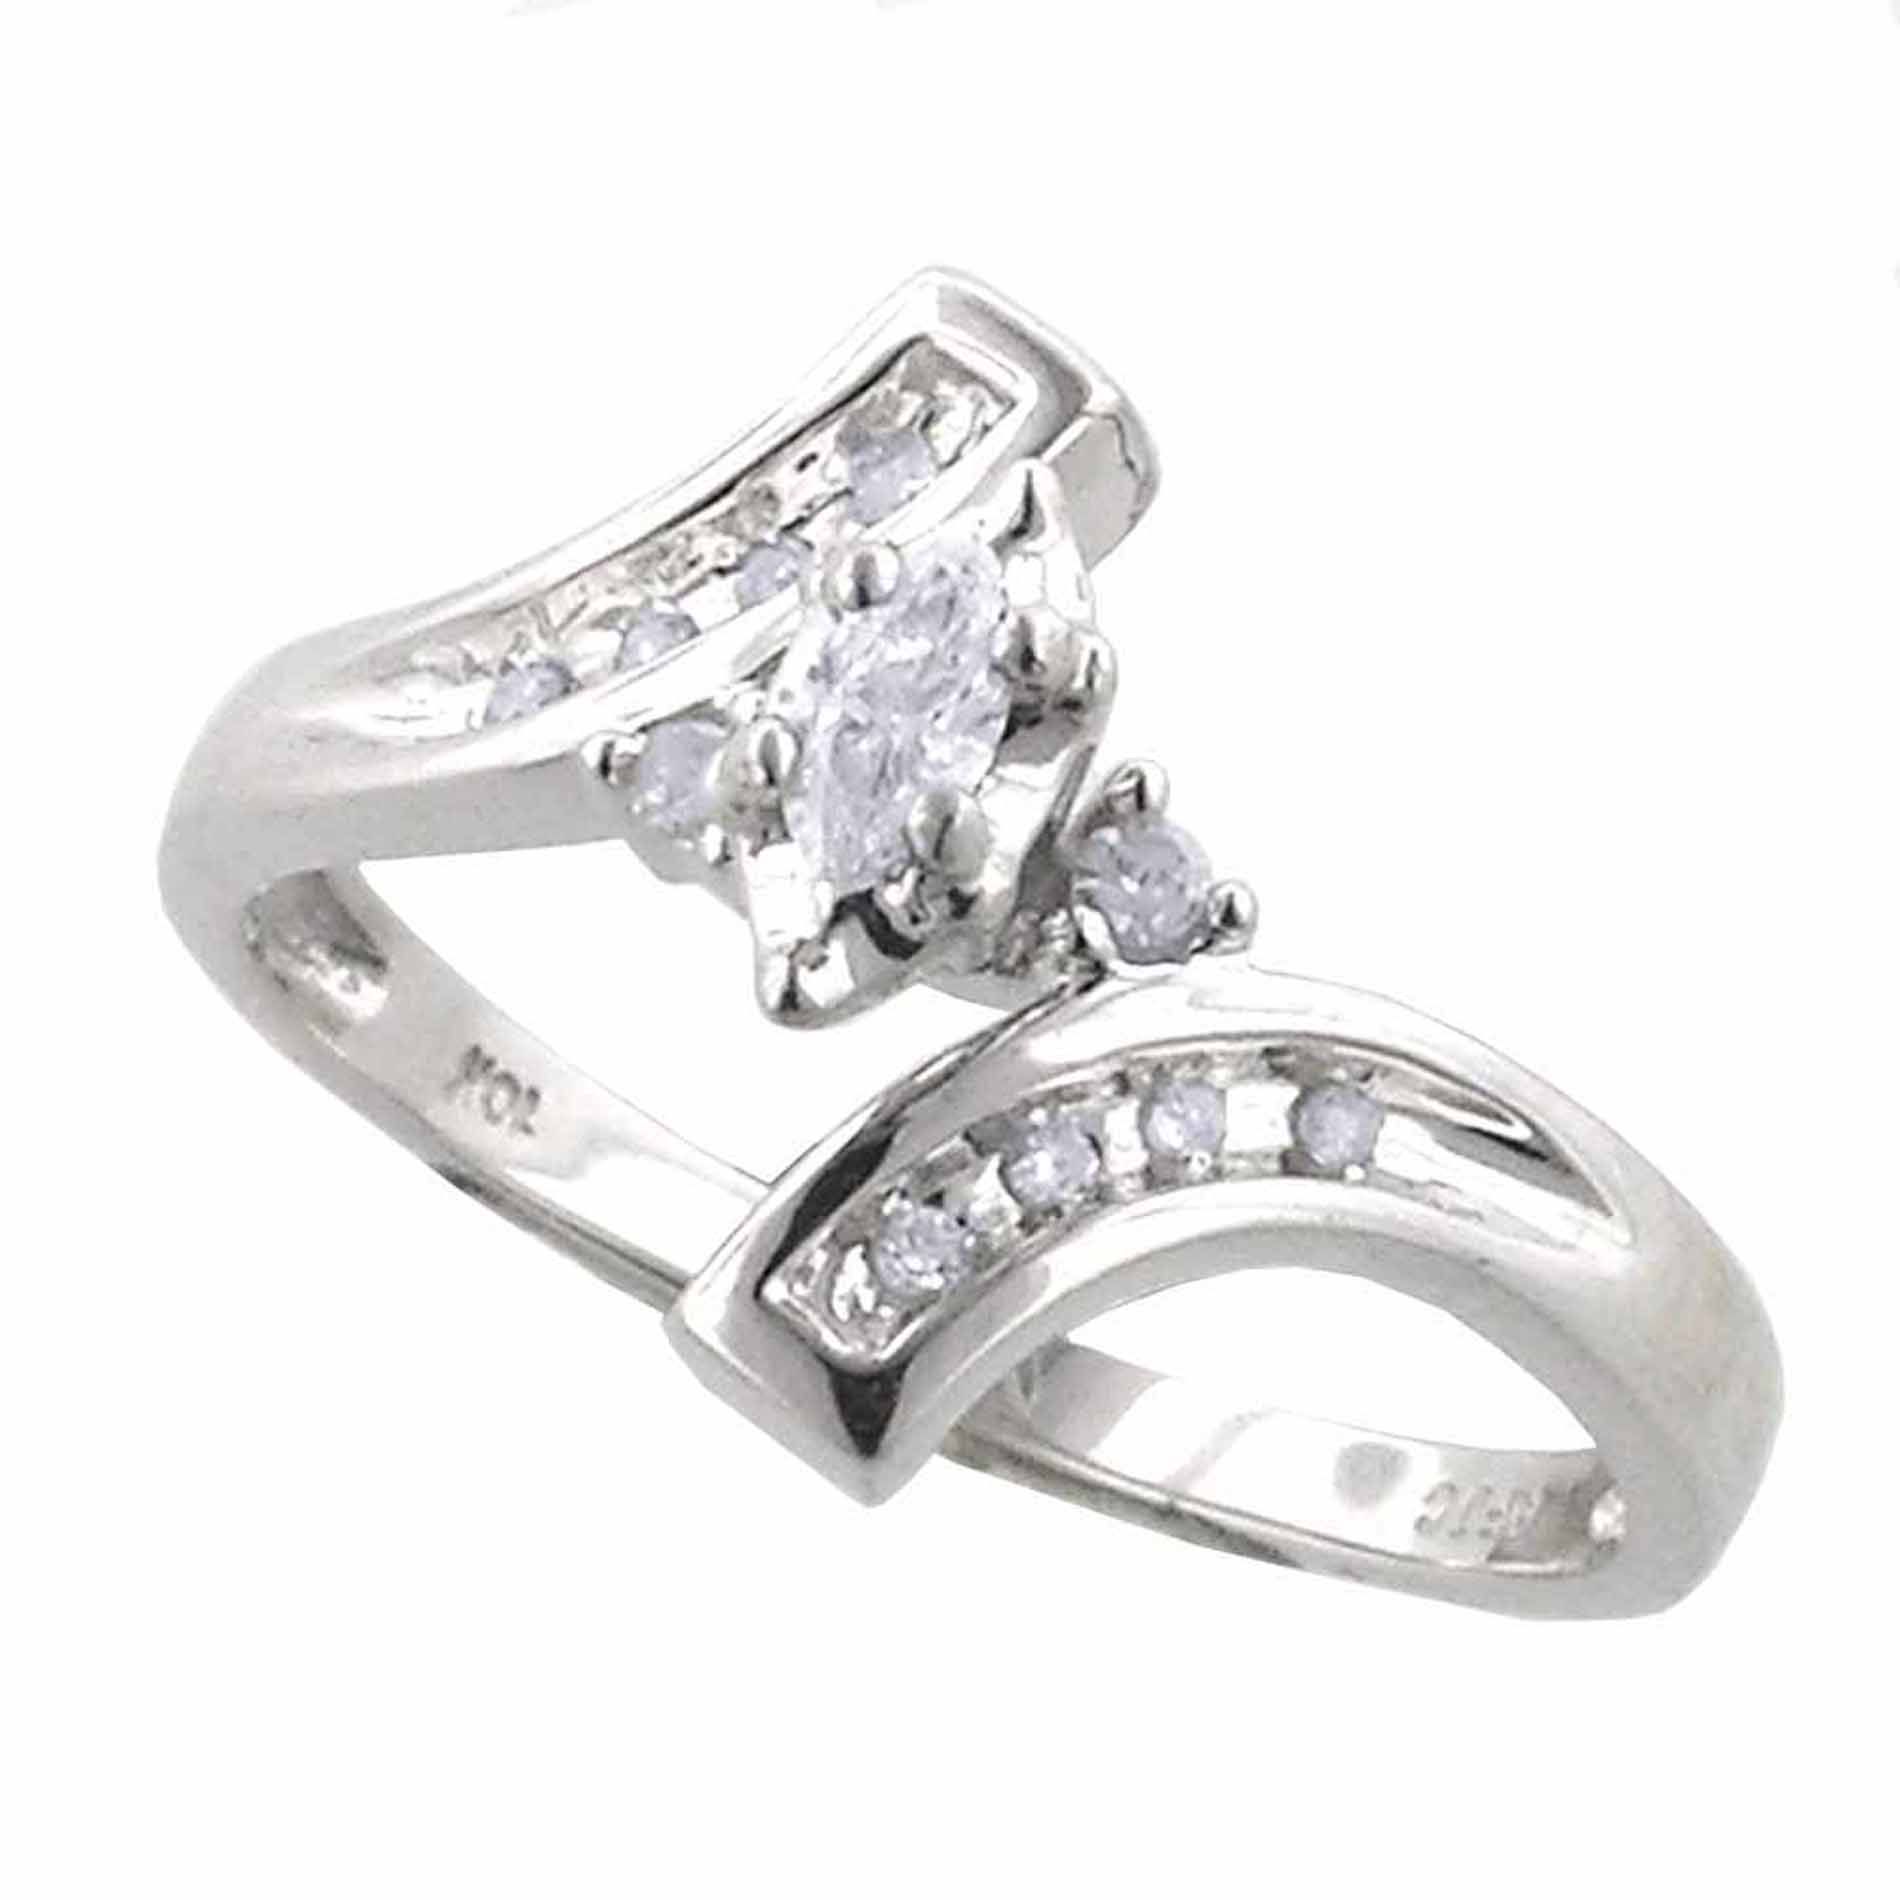 10k White Gold and Diamond Accent Swirl Engagement Ring